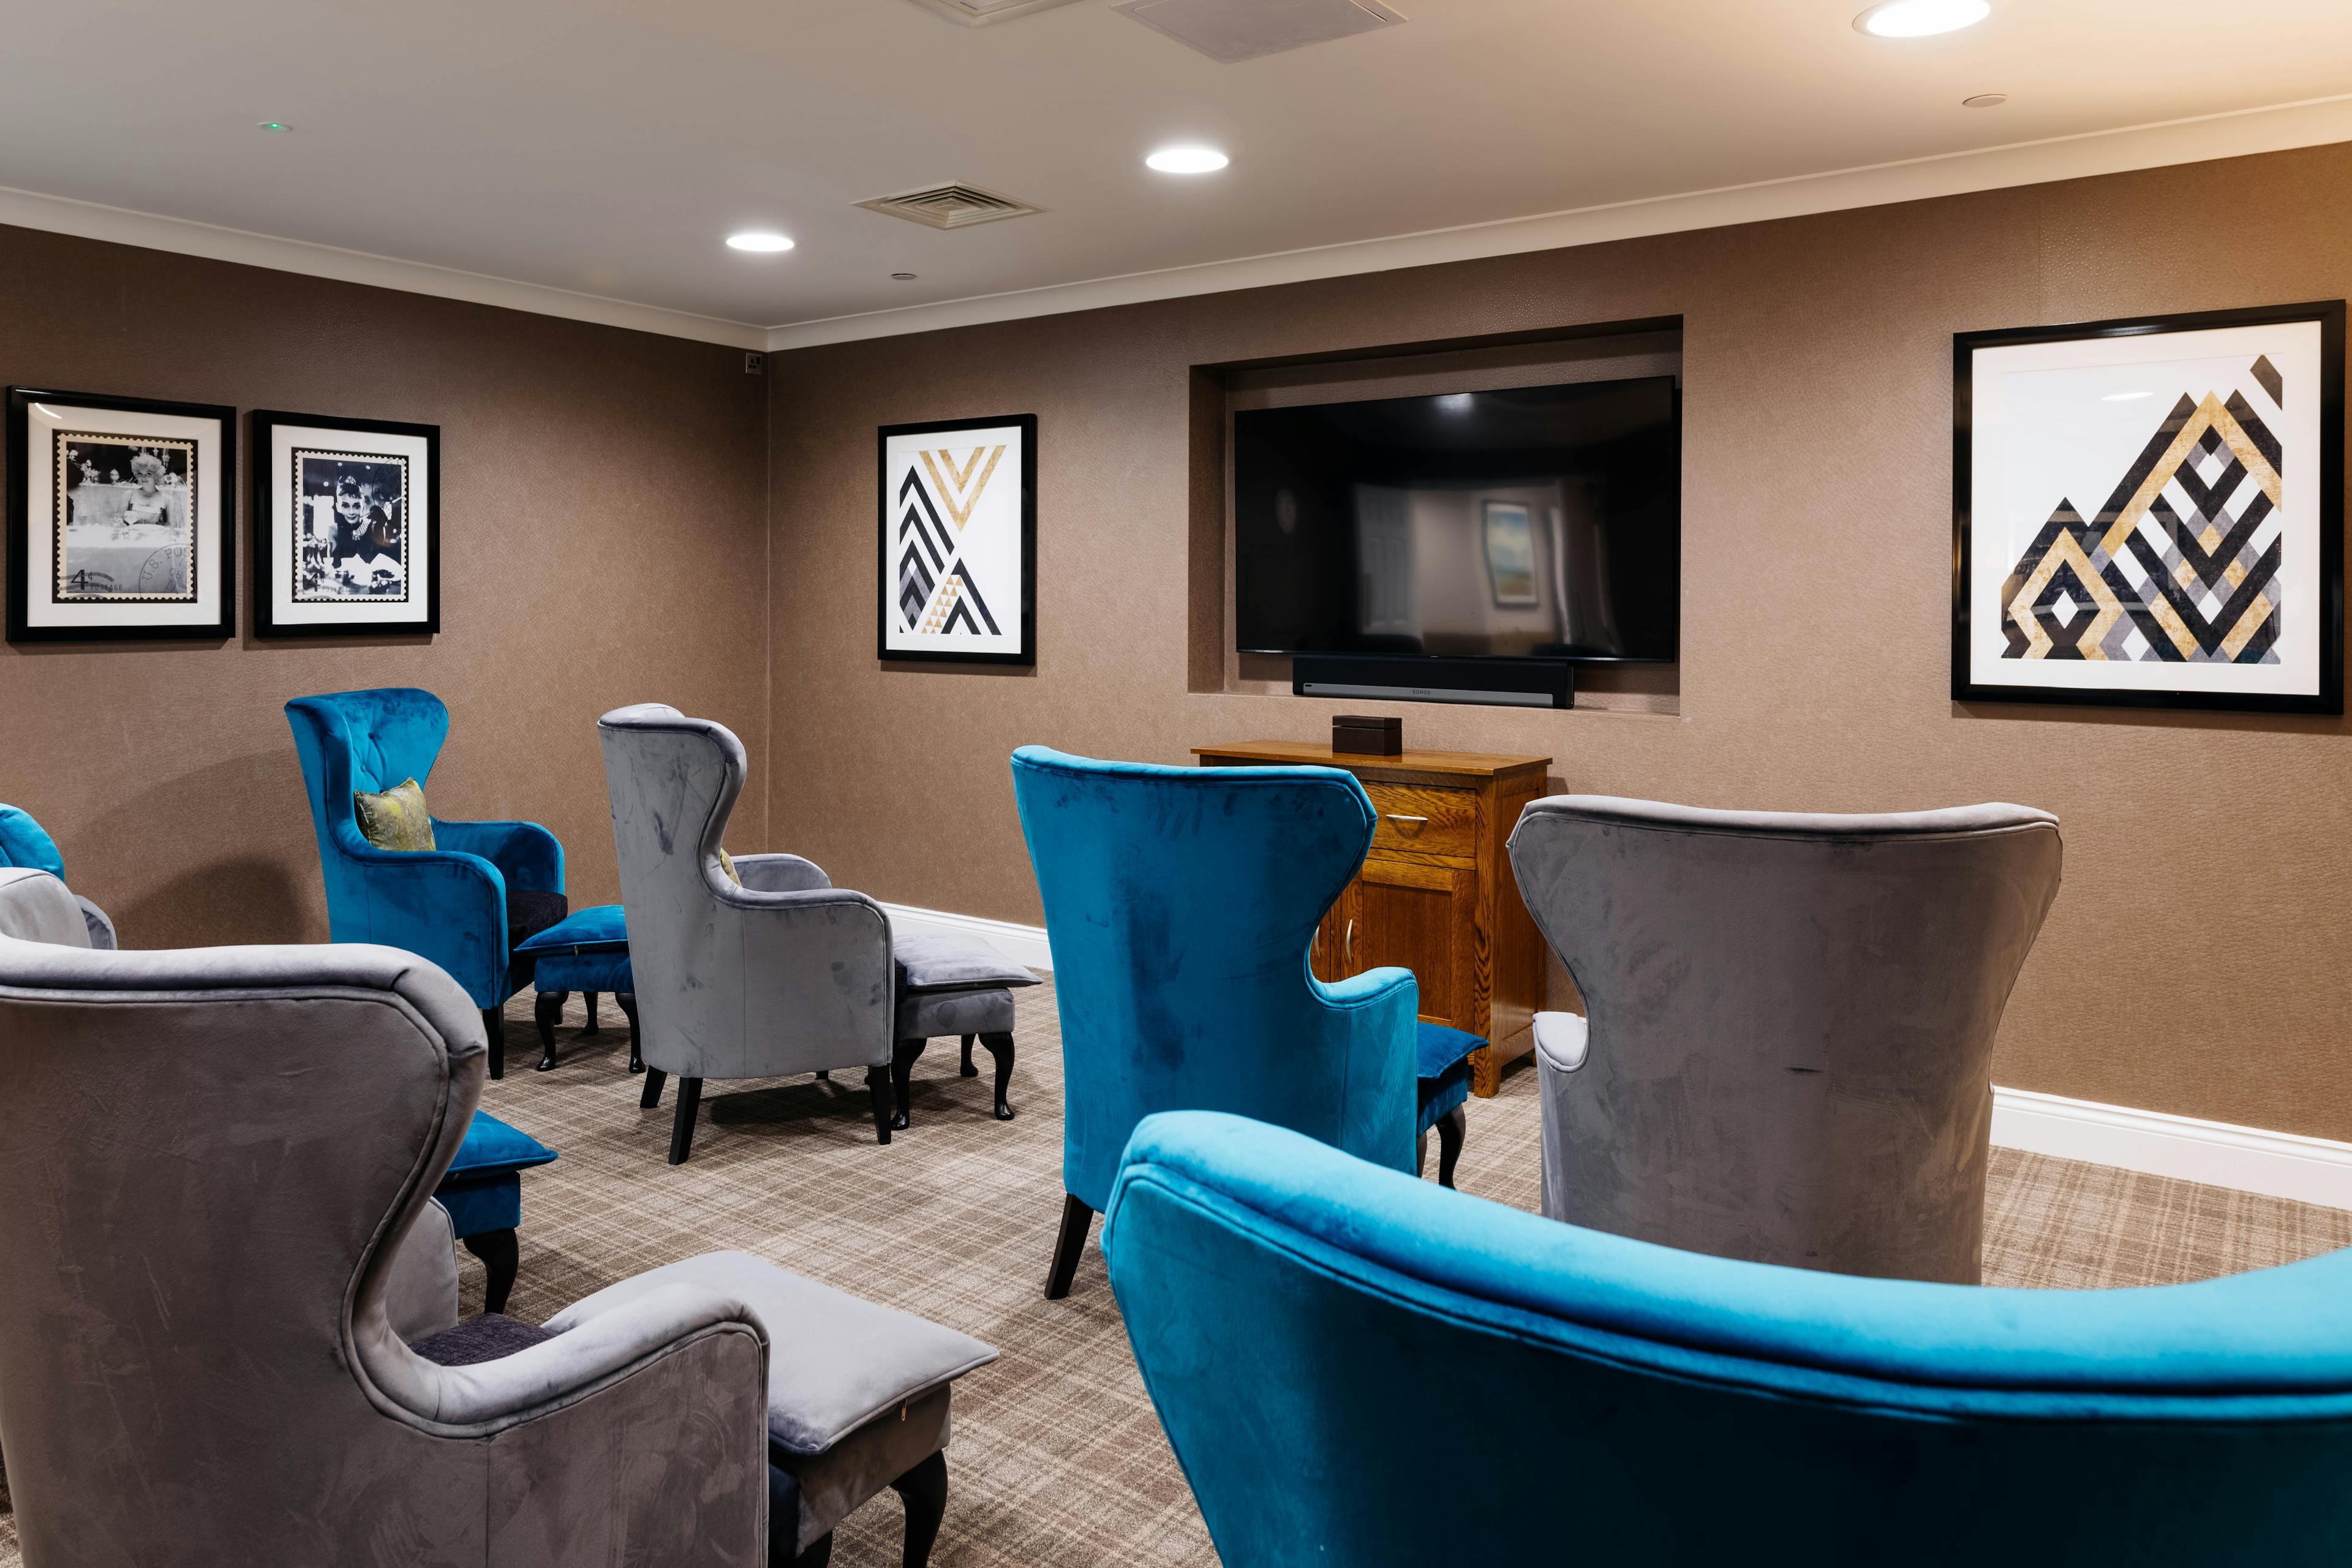 Cinema at Snowdrop Place Care Home in Southampton, Hampshire